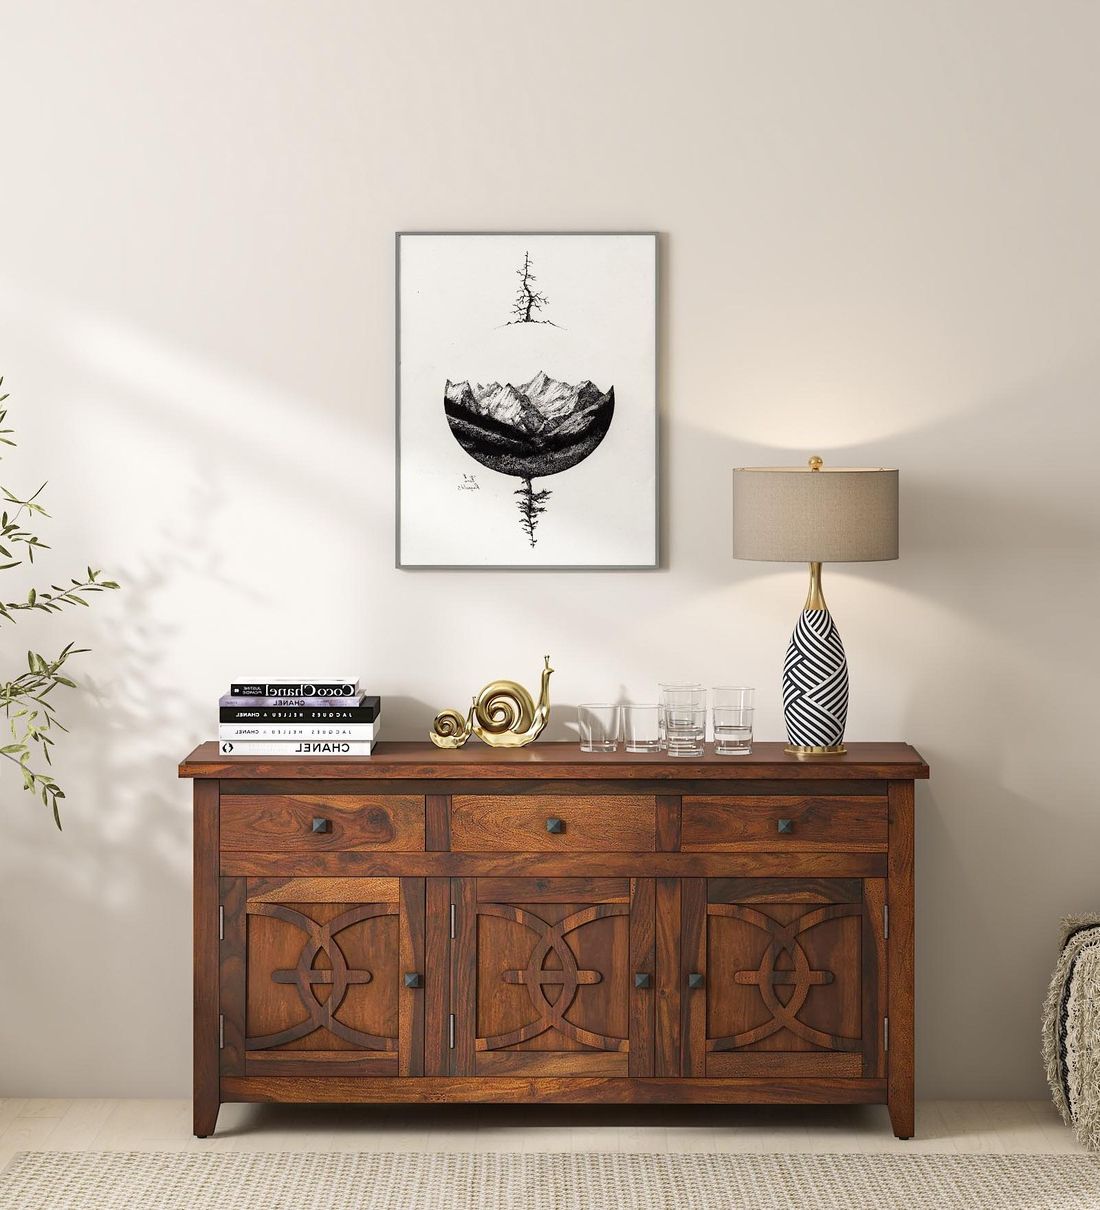 [%buy Karl Sheesham Wood Sideboard In Scratch Resistant Honey Oak Finish At  4% Offwoodsworth From Pepperfry | Pepperfry For Popular Solid Wood Buffet Sideboards|solid Wood Buffet Sideboards Intended For Favorite Buy Karl Sheesham Wood Sideboard In Scratch Resistant Honey Oak Finish At  4% Offwoodsworth From Pepperfry | Pepperfry|2019 Solid Wood Buffet Sideboards Within Buy Karl Sheesham Wood Sideboard In Scratch Resistant Honey Oak Finish At  4% Offwoodsworth From Pepperfry | Pepperfry|latest Buy Karl Sheesham Wood Sideboard In Scratch Resistant Honey Oak Finish At  4% Offwoodsworth From Pepperfry | Pepperfry For Solid Wood Buffet Sideboards%] (Photo 13 of 15)